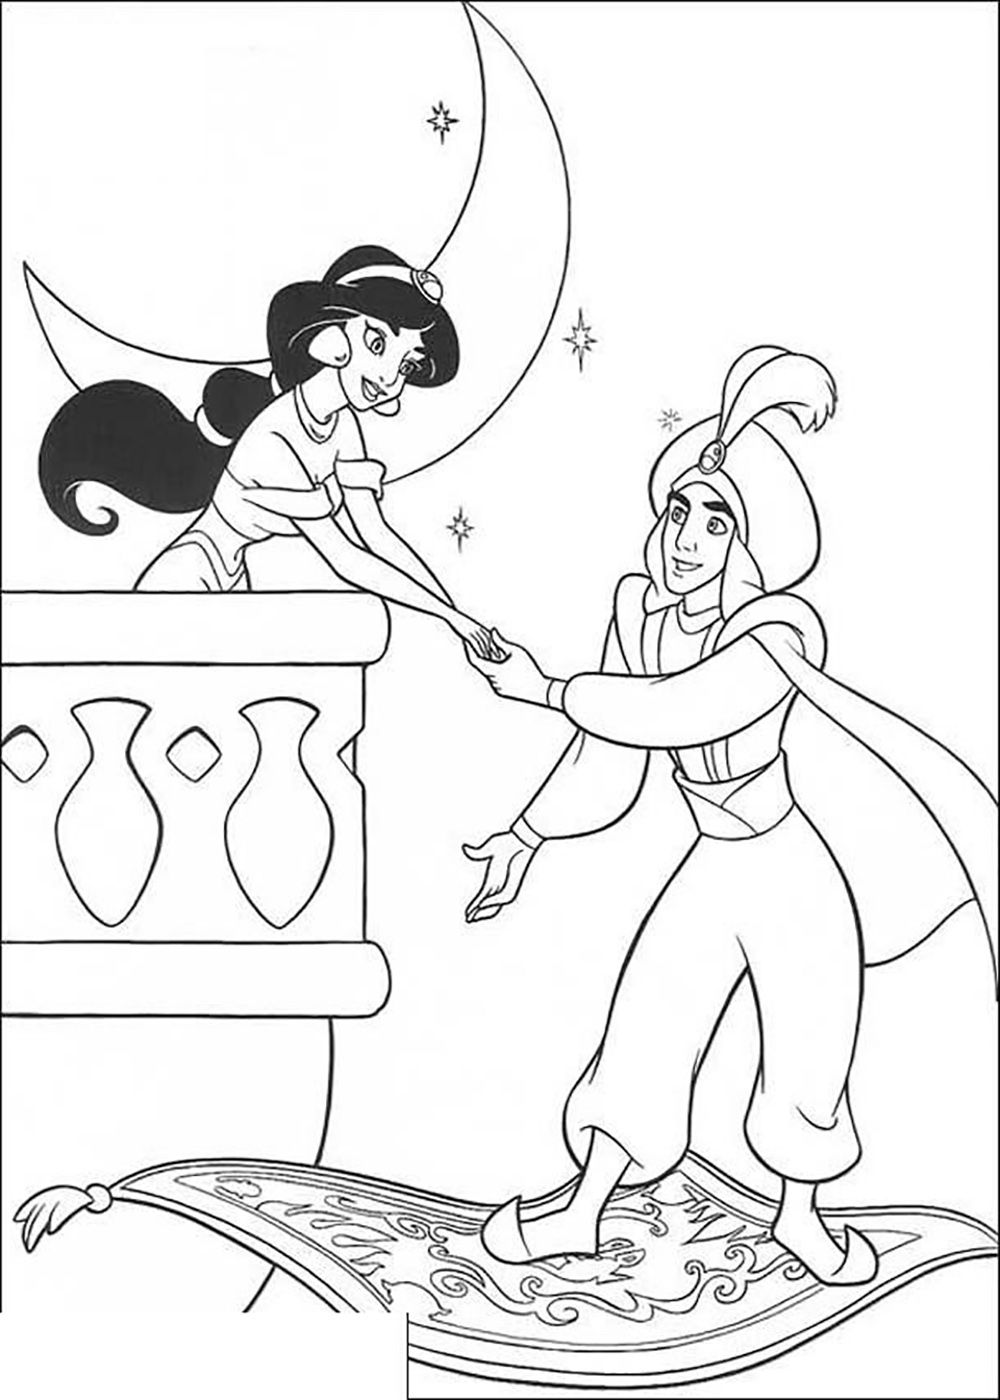 Holding Hands Coloring Pages at GetColorings.com | Free ...